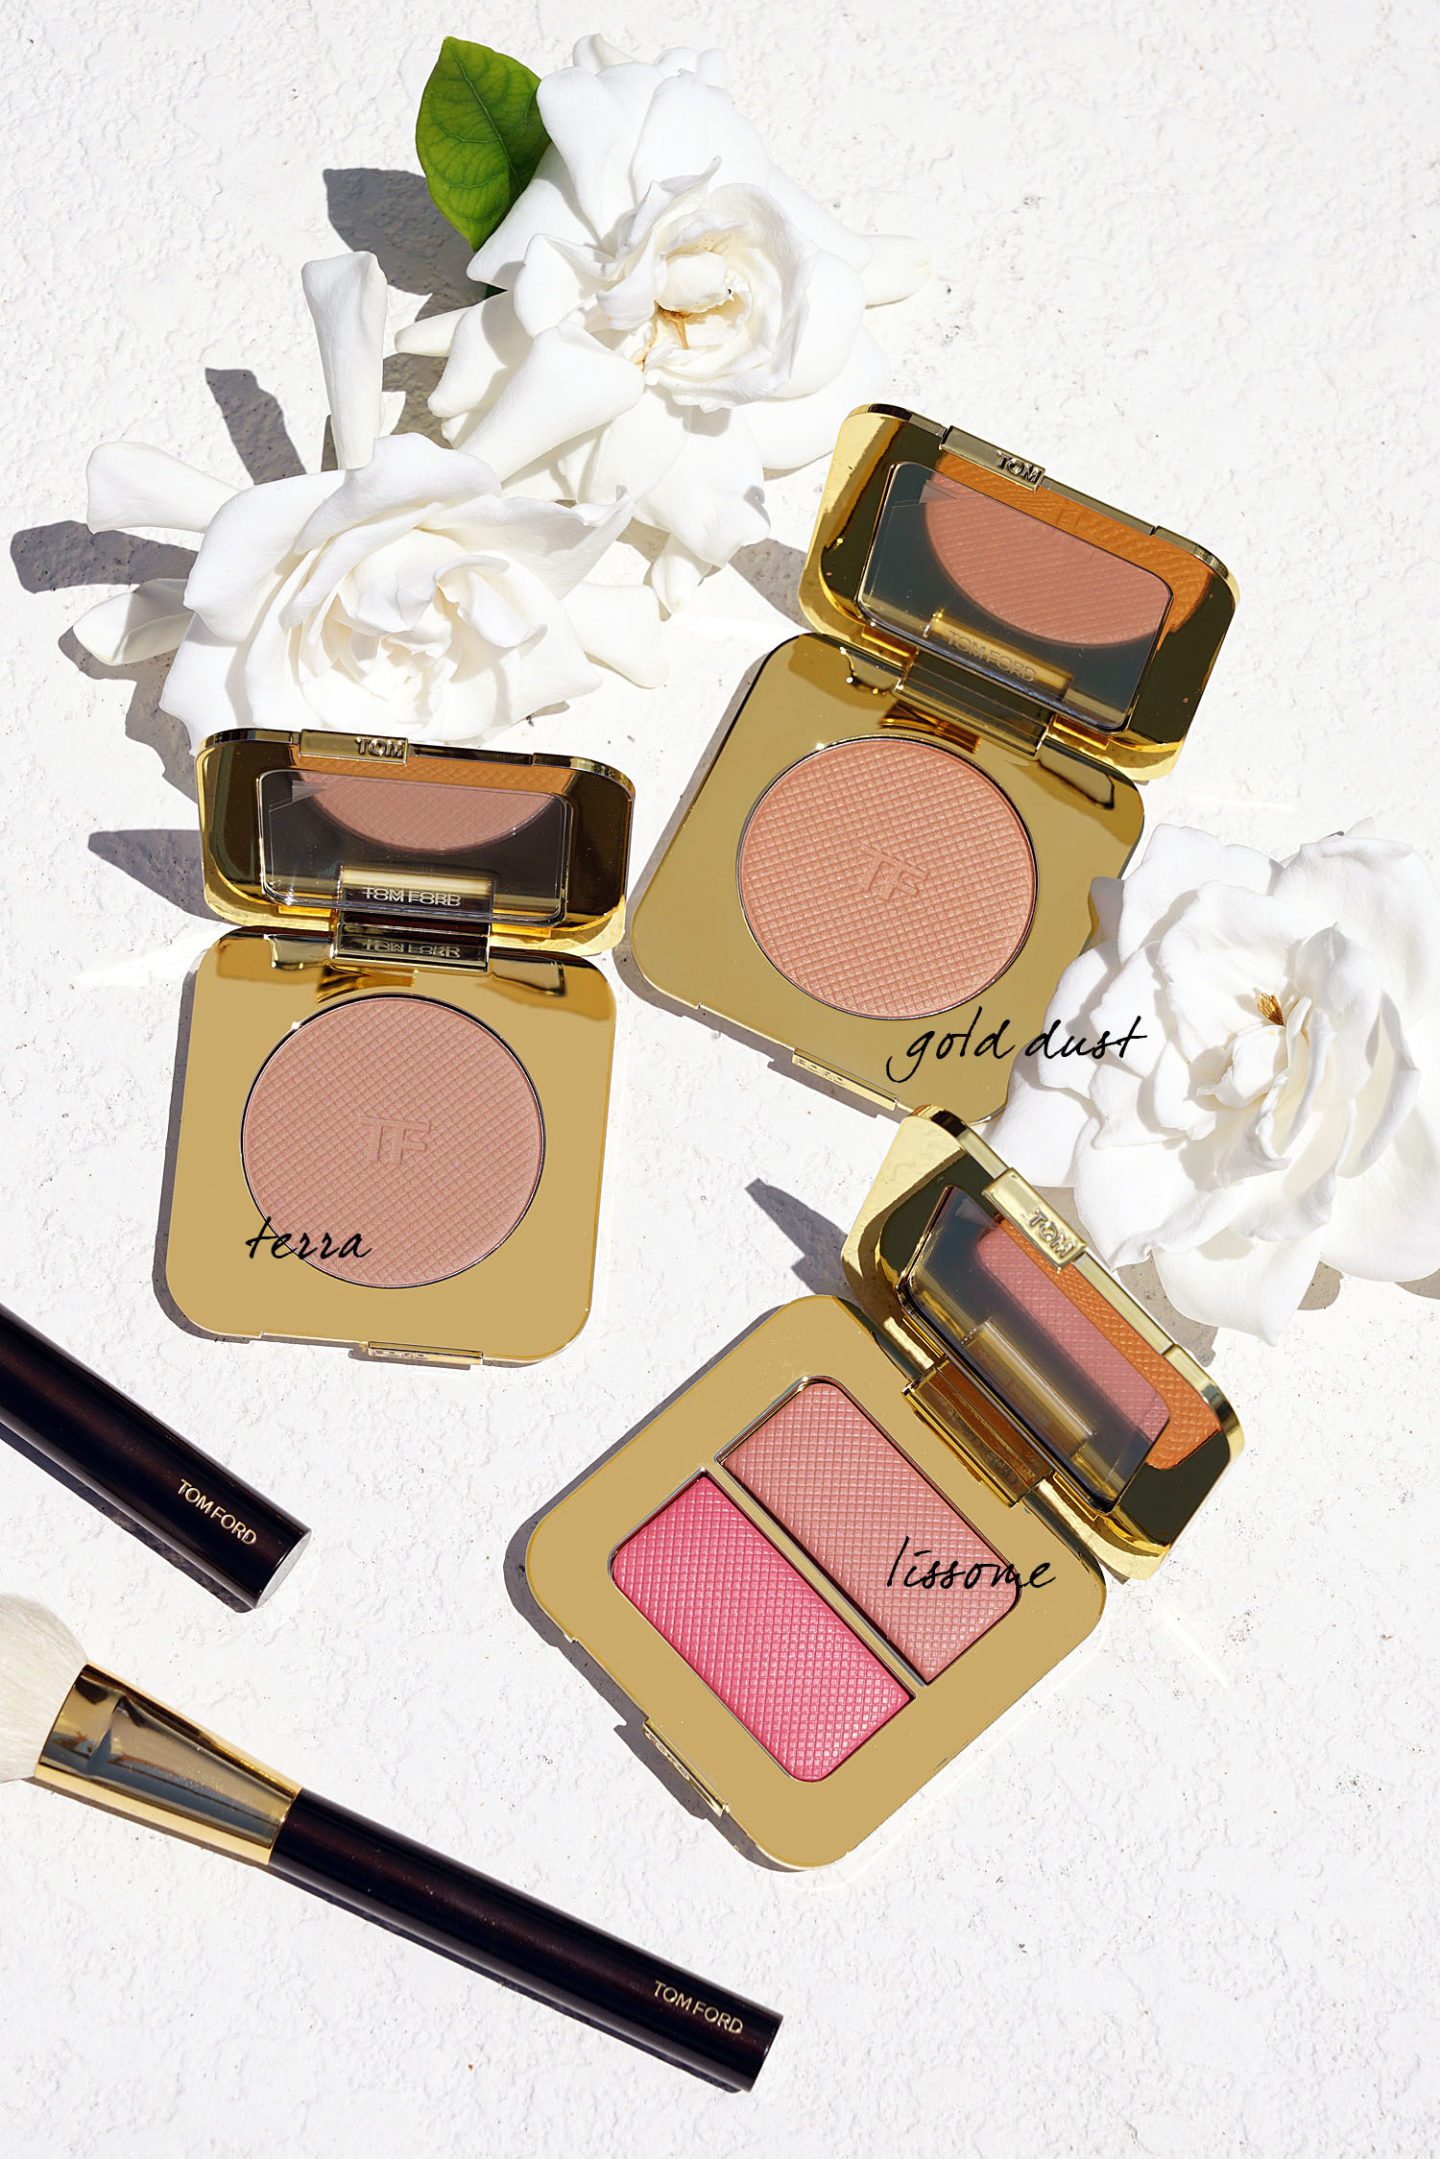 Tom Ford Soleil Glow Bronzer Terra and Gold Dust and Sheer Cheek Duo Lissome